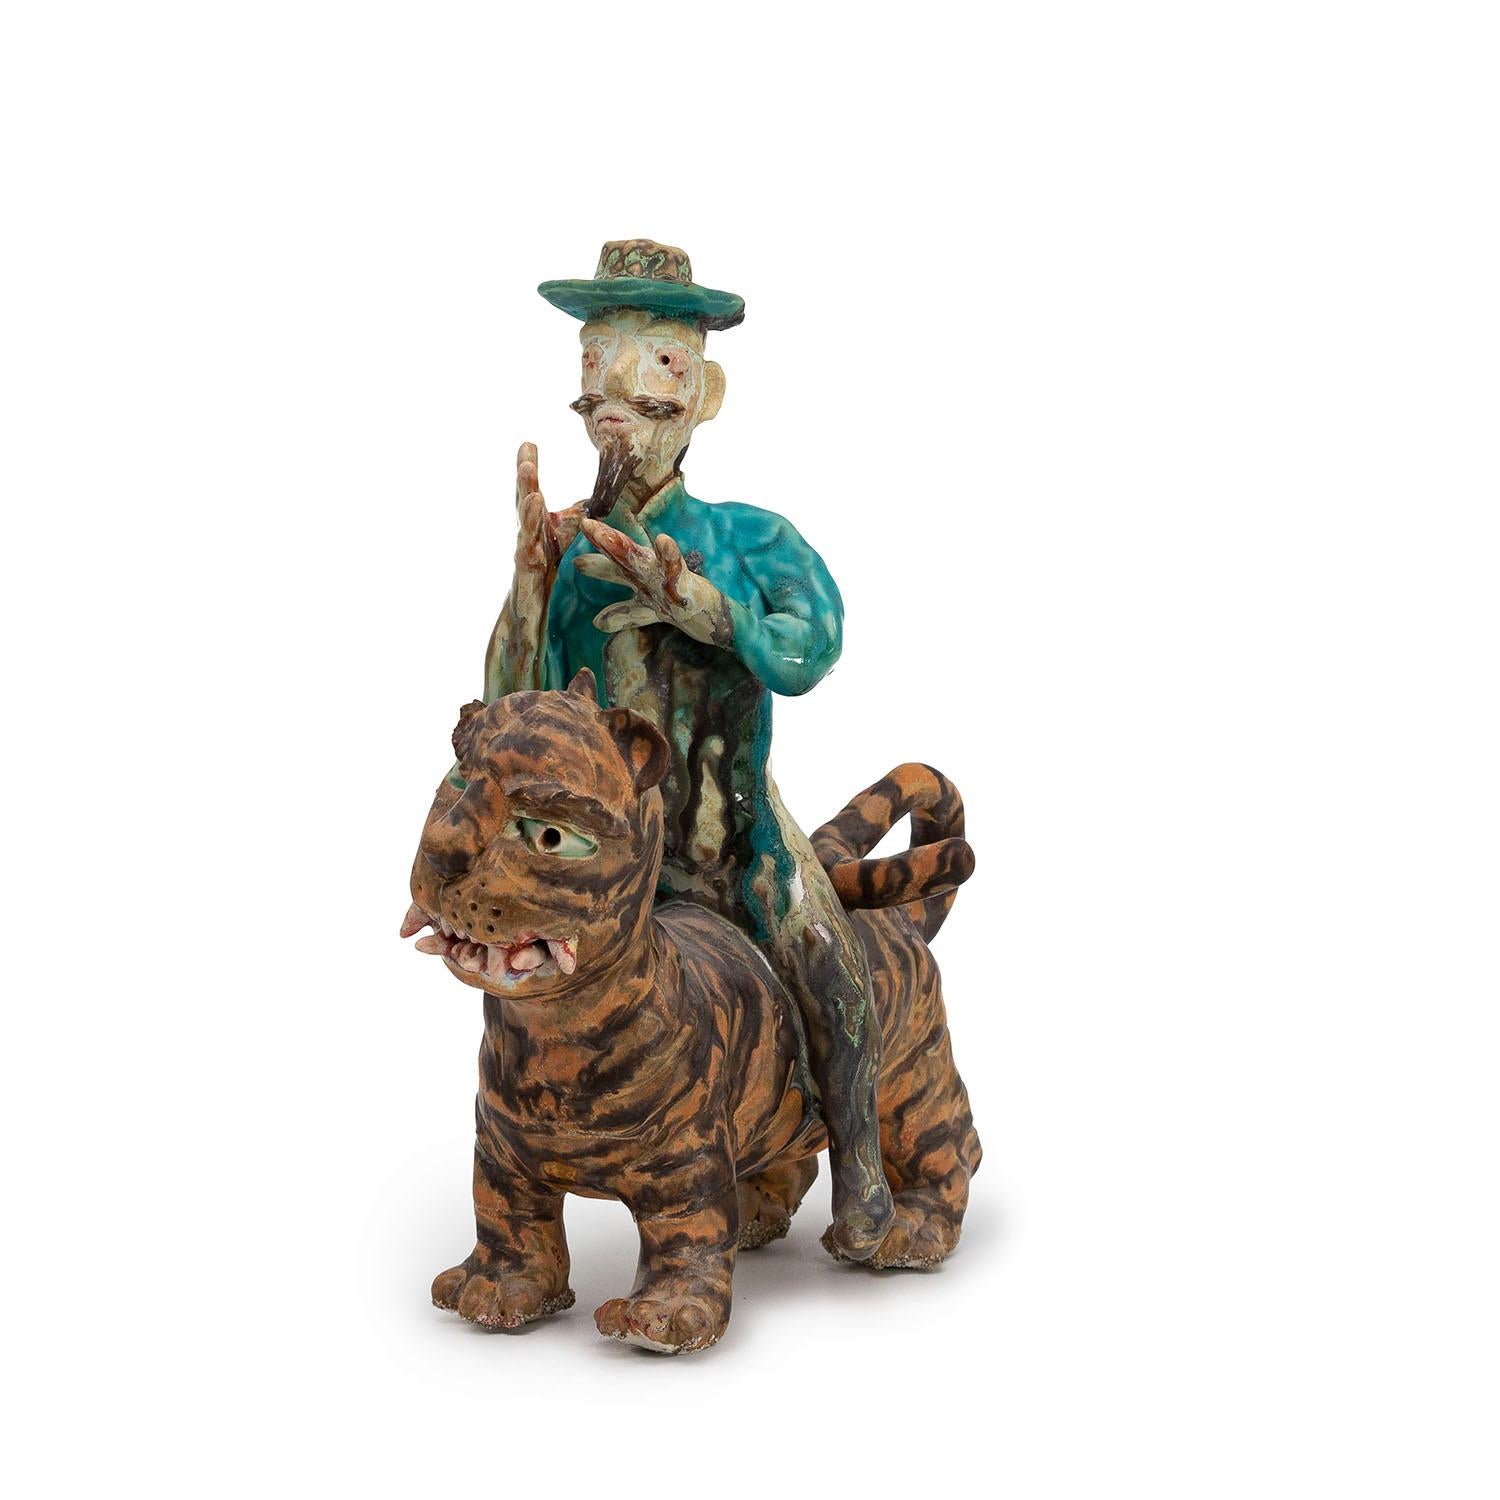 Man Riding Tiger by Sunkoo Yuh  - Contemporary Sculpture by SunKoo Yuh